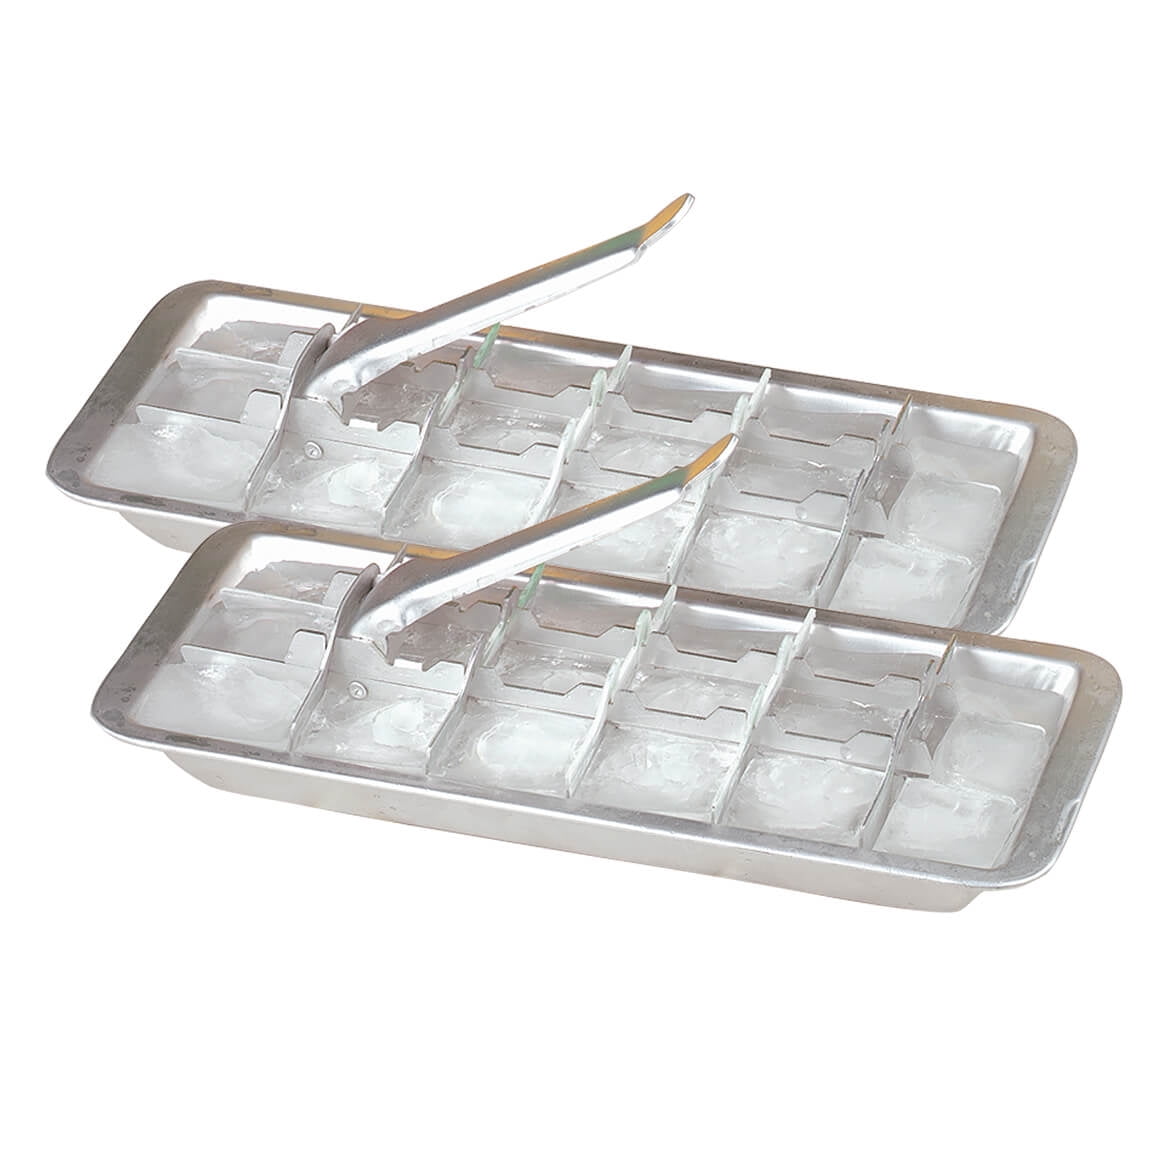 Set of 2 Each Tray Features 18 Vintage Kitchen Aluminum Metal Ice Cube Trays 